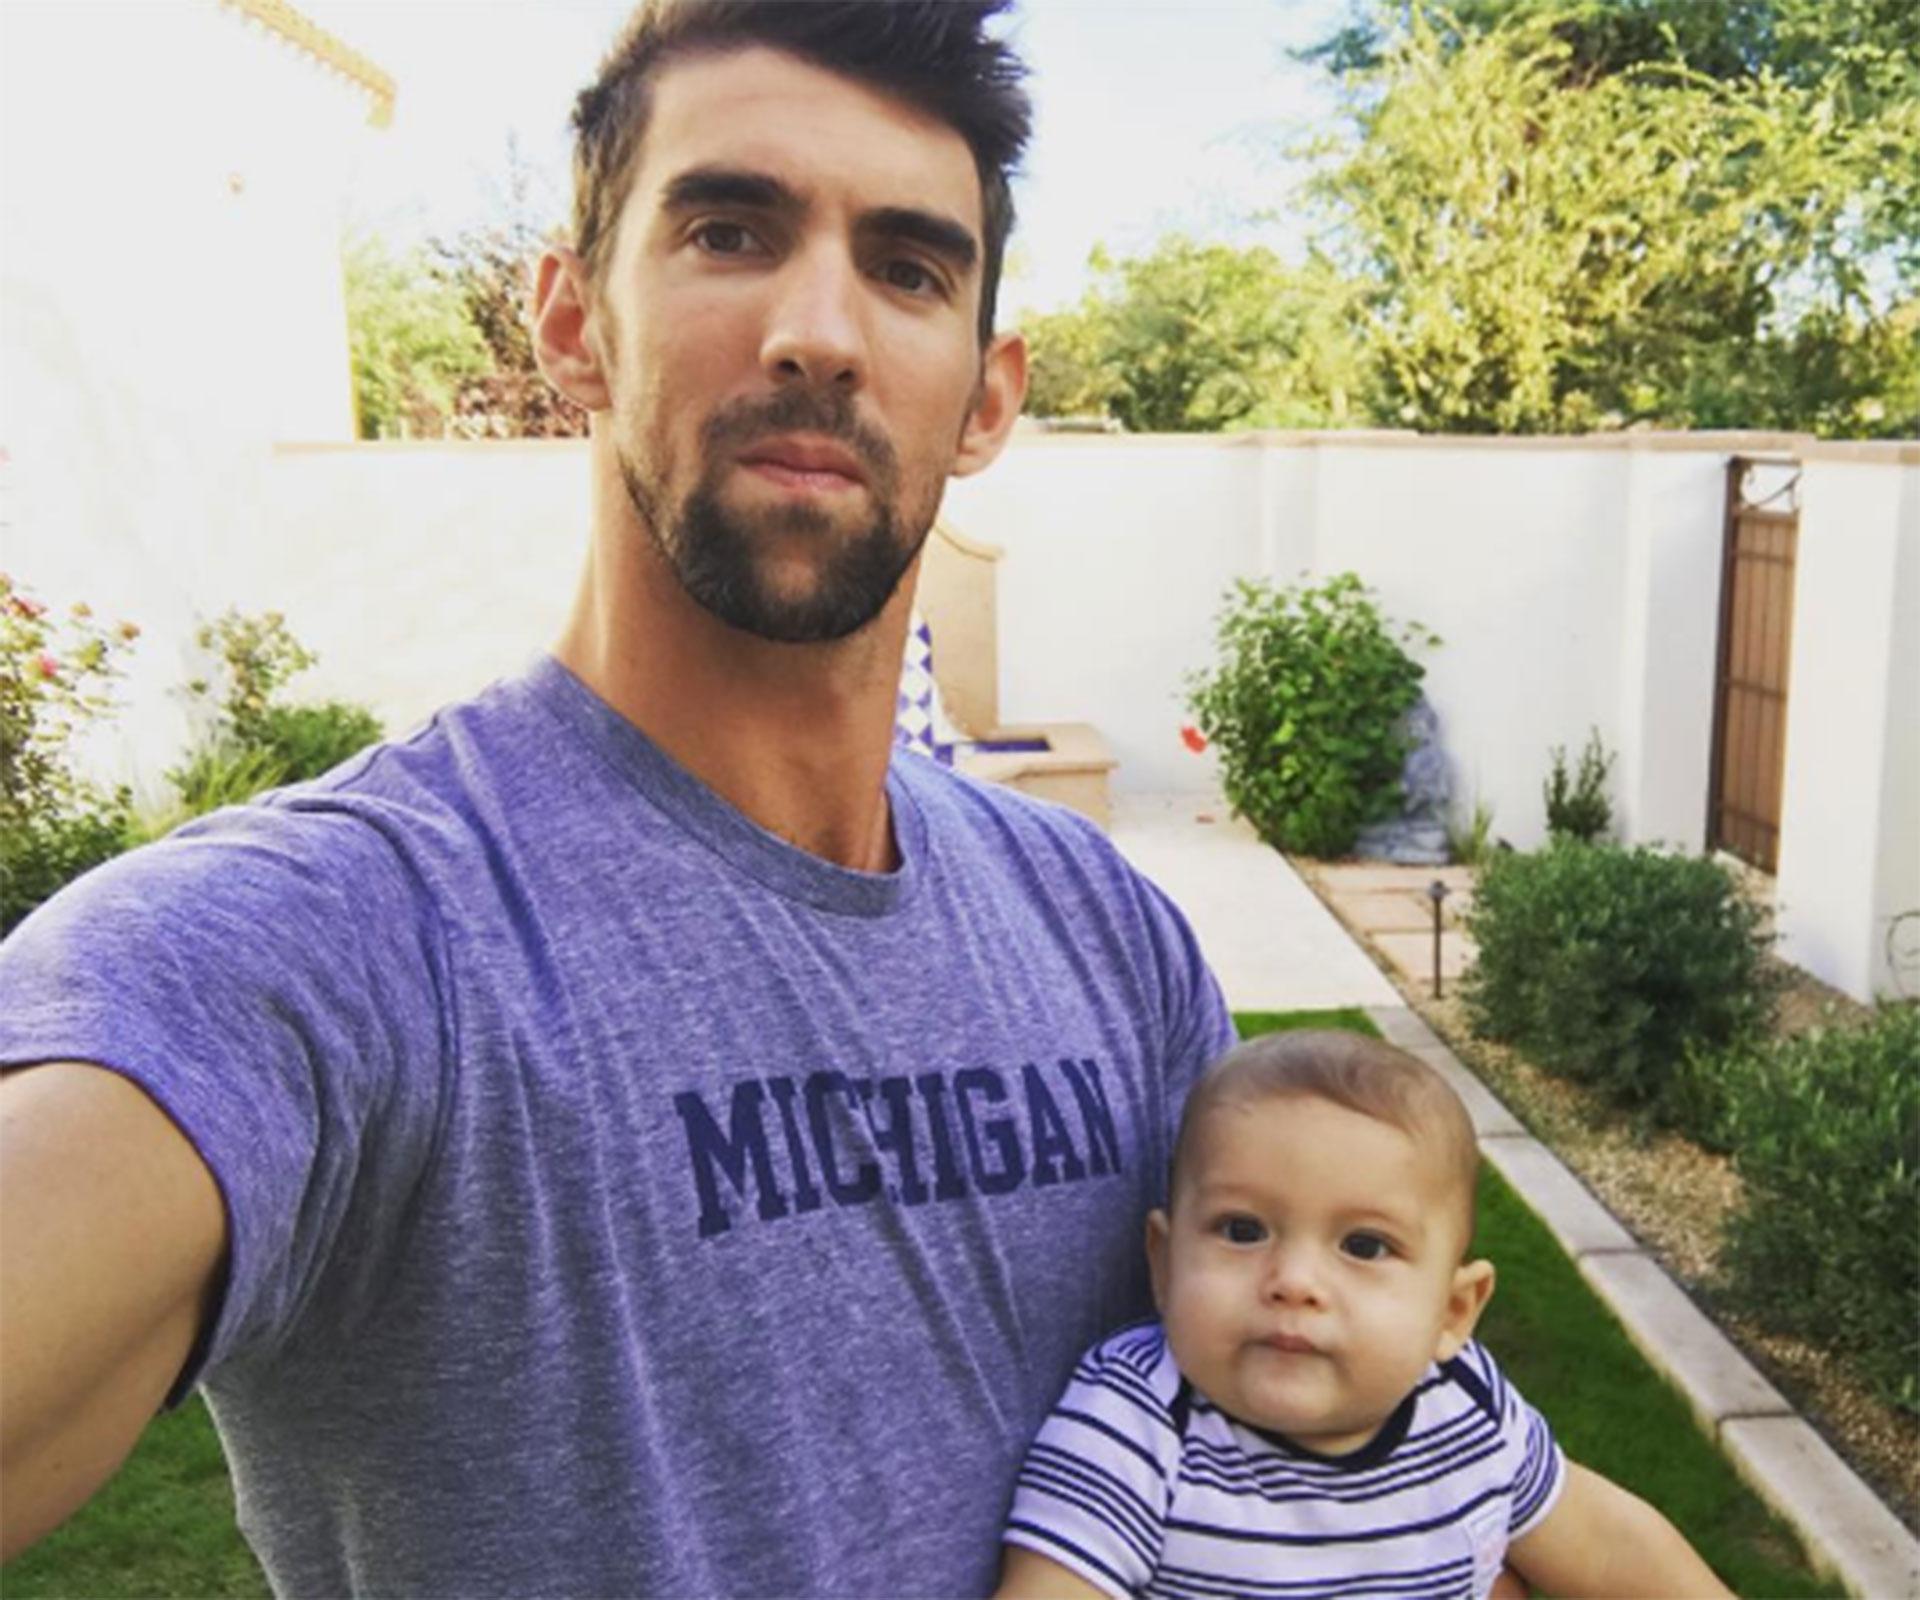 Michael Phelps shares adorable video of baby Boomer learning to swim